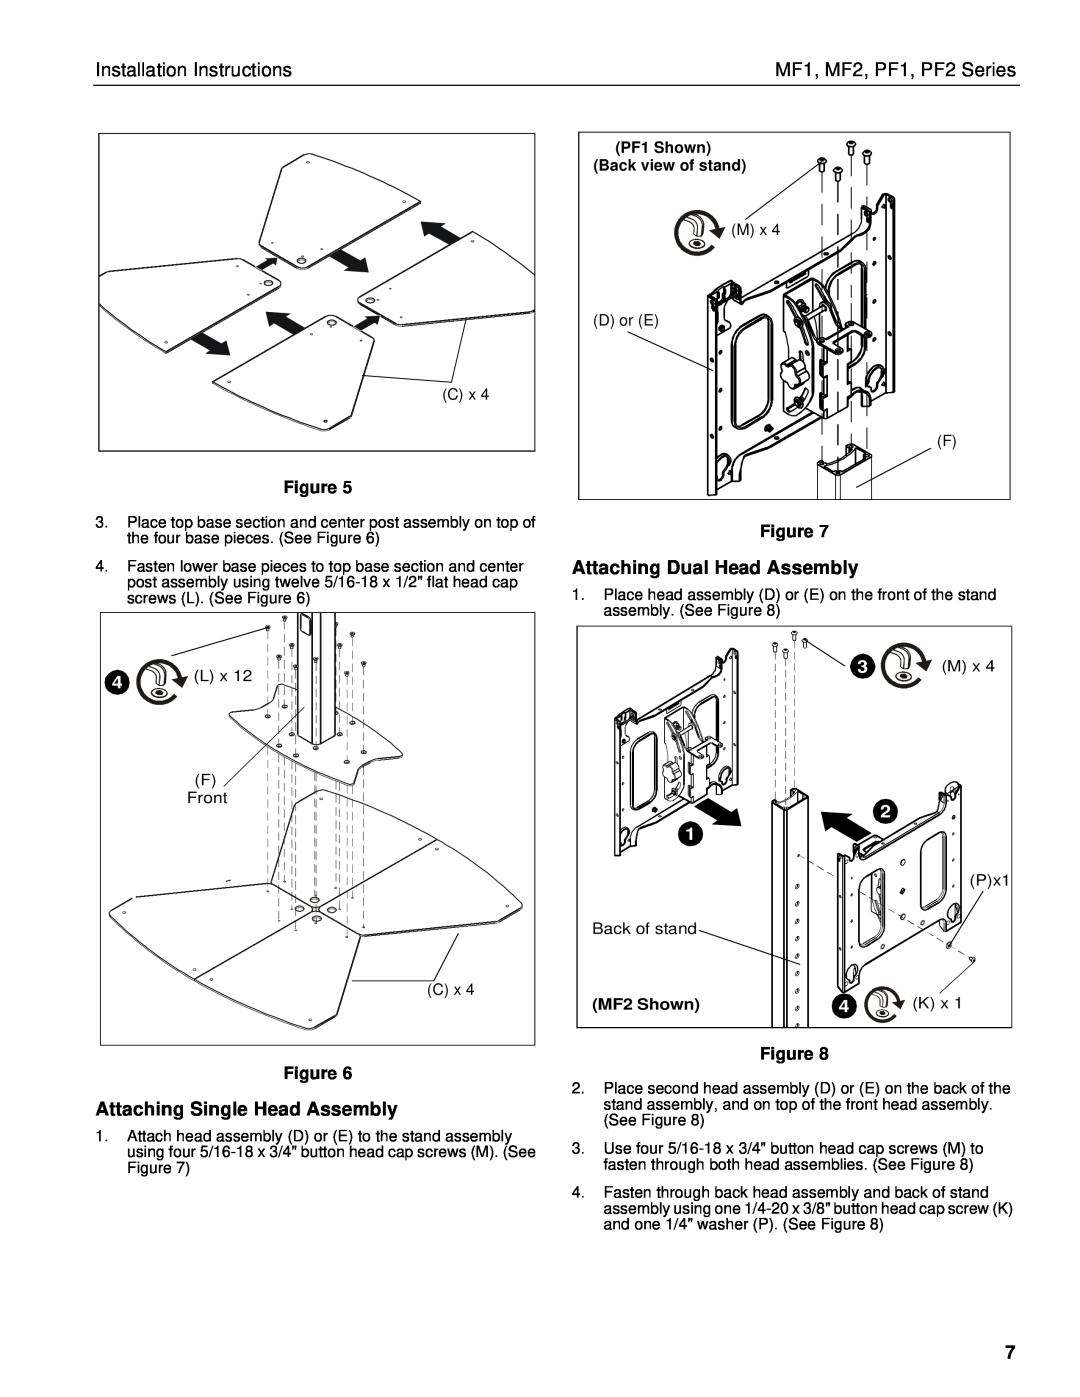 Chief Manufacturing MF1 Series Attaching Single Head Assembly, Attaching Dual Head Assembly, Installation Instructions 